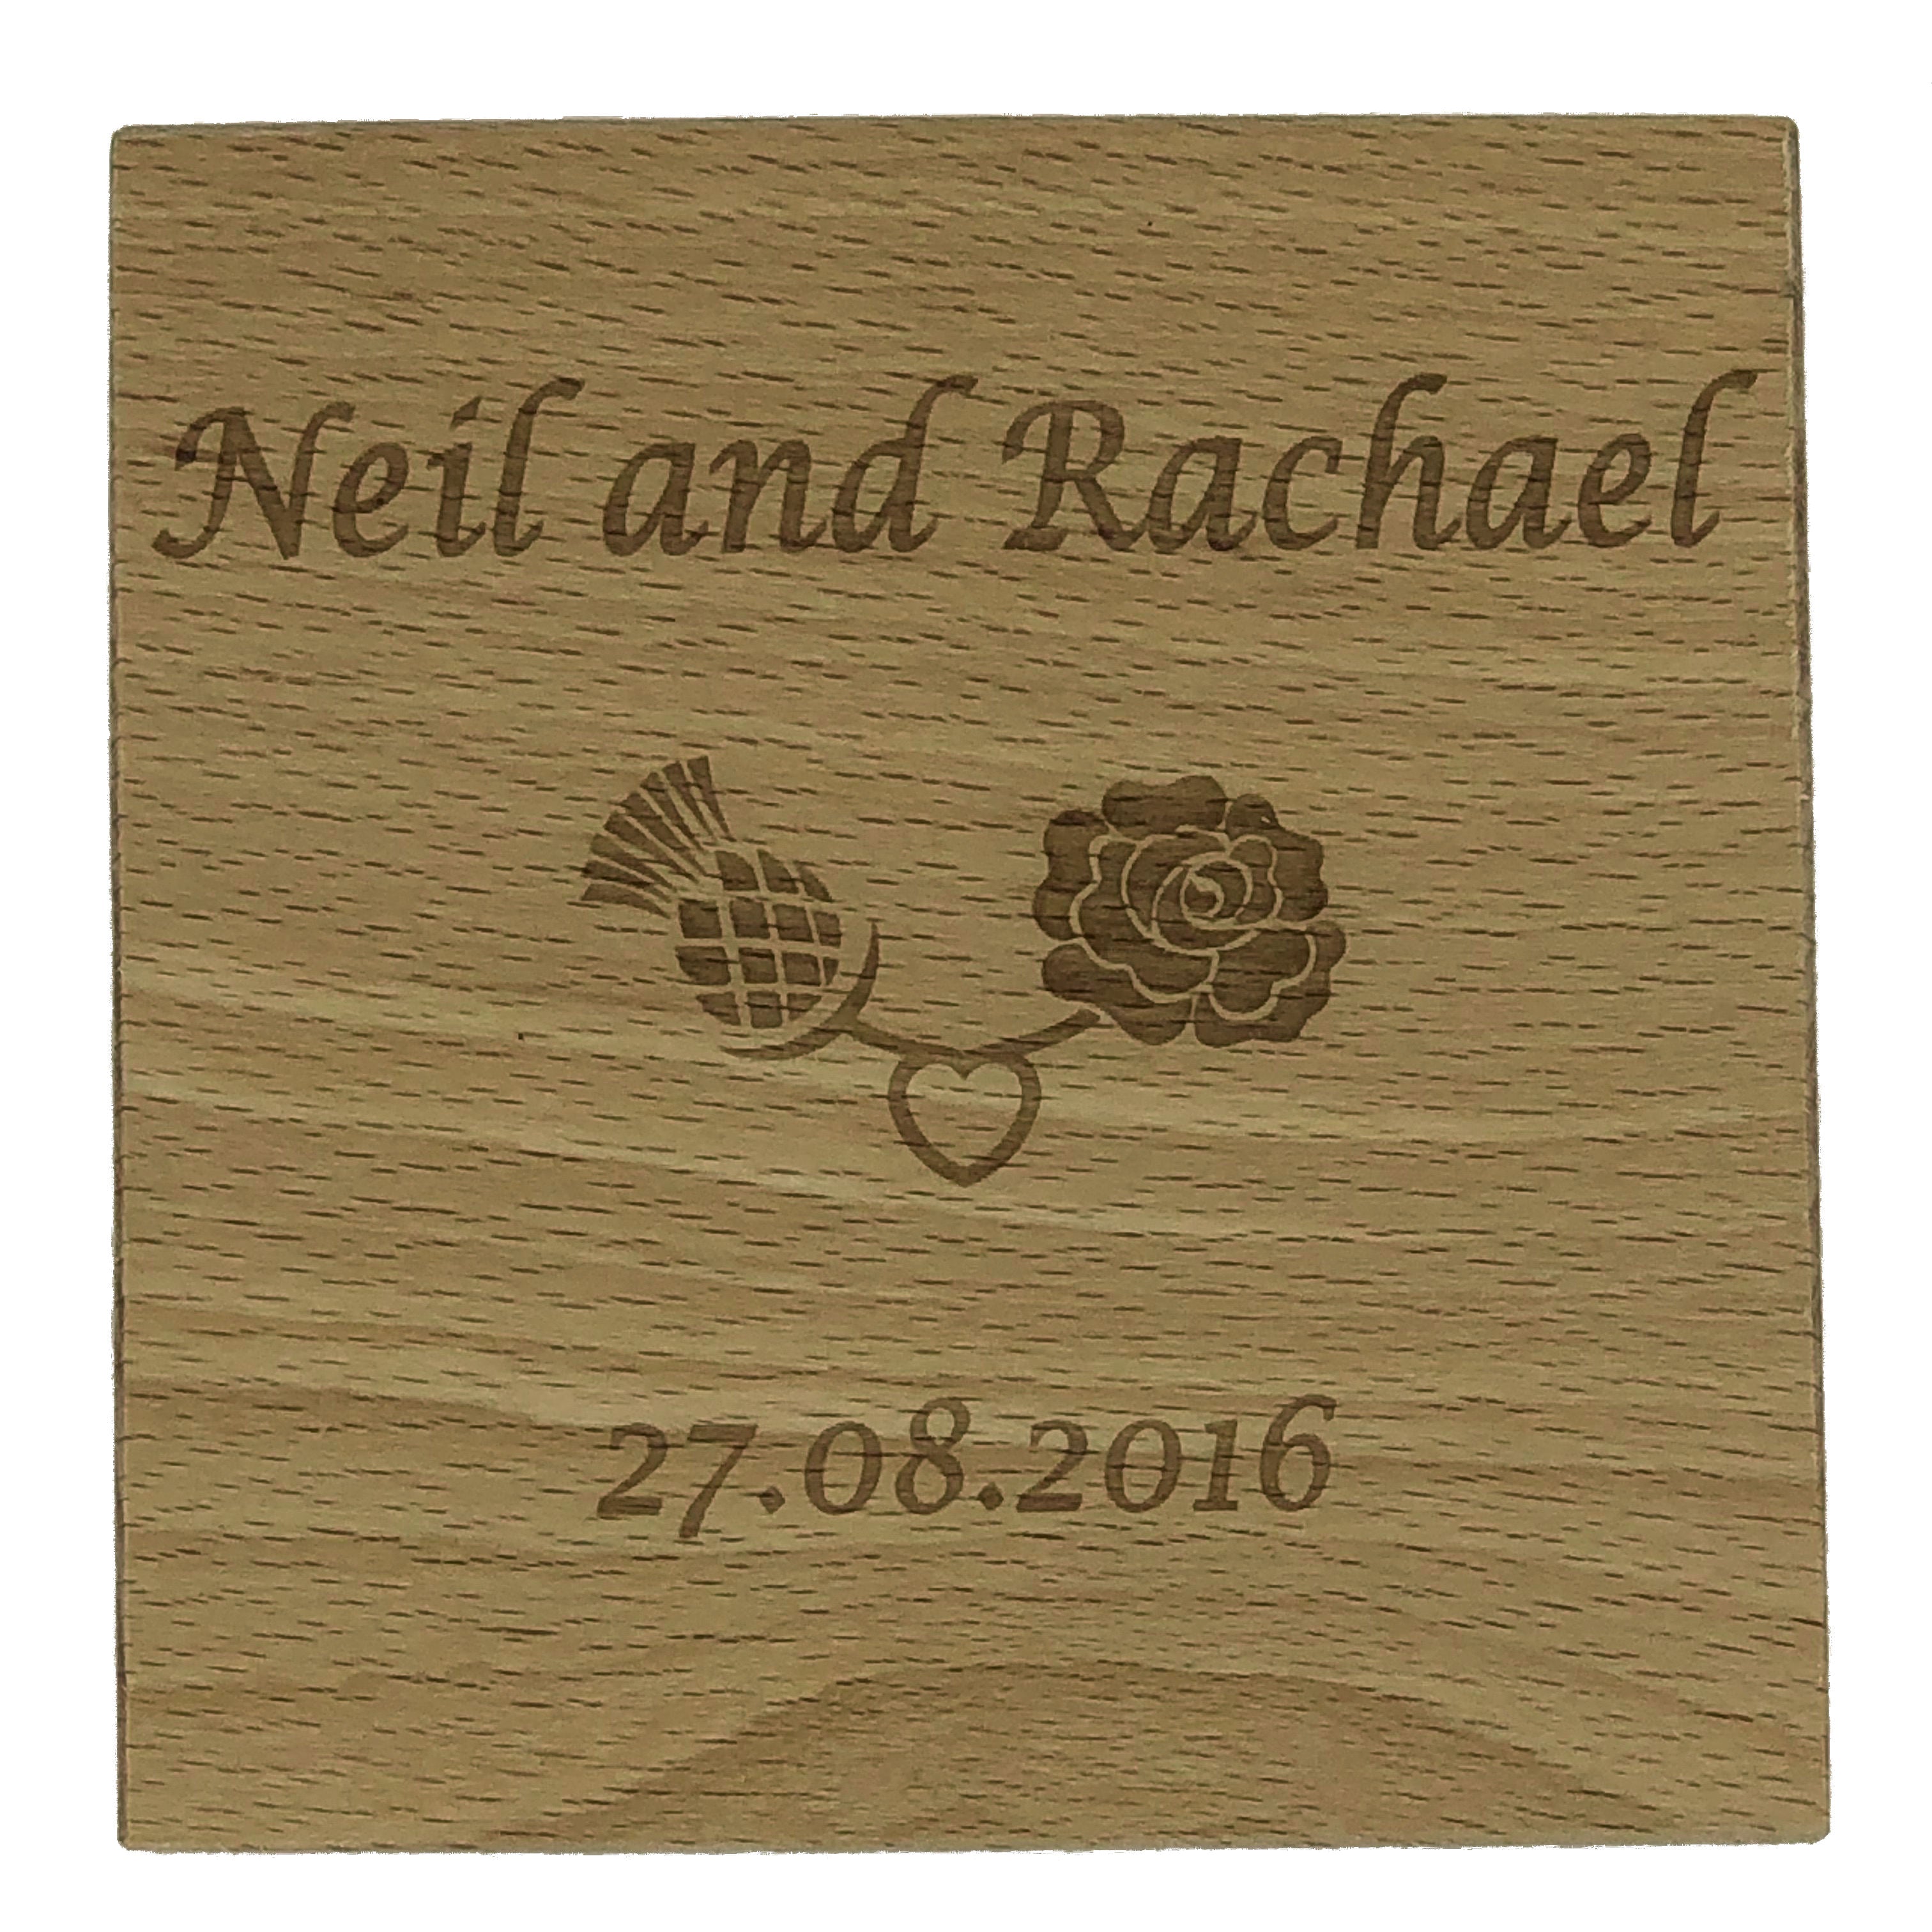 Personalised wooden wedding coaster - names, date, thistle/rose decal